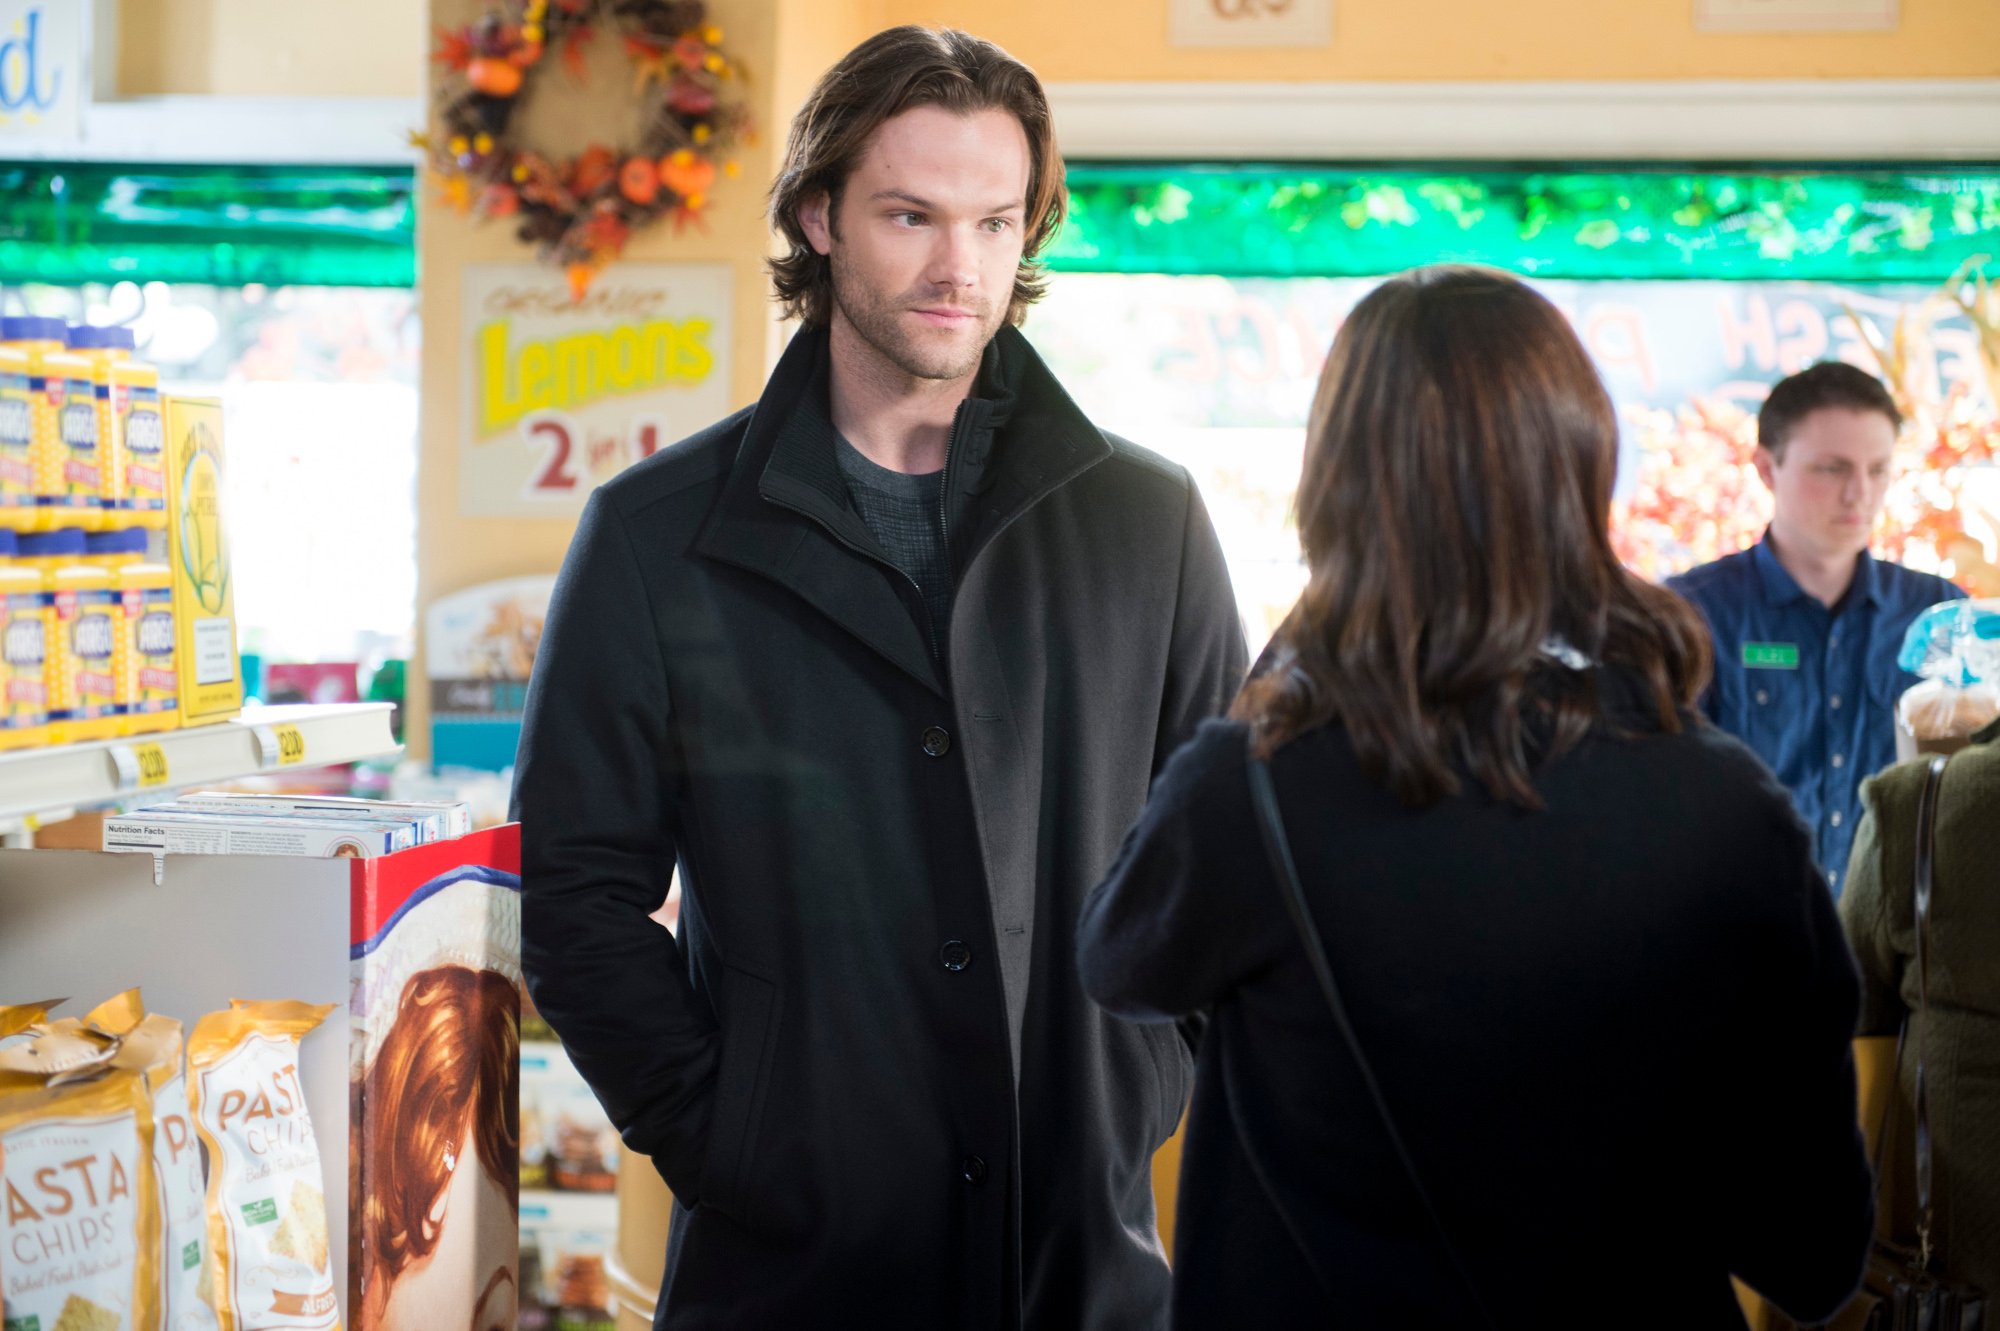 Jared Padalecki and Alexis Bledel as Dean and Rory in 'Gilmore Girls: A Year in the Life' on Netflix. Dean is wearing a black coat and looks uncomfortable. Rory is facing him but away from the camera.